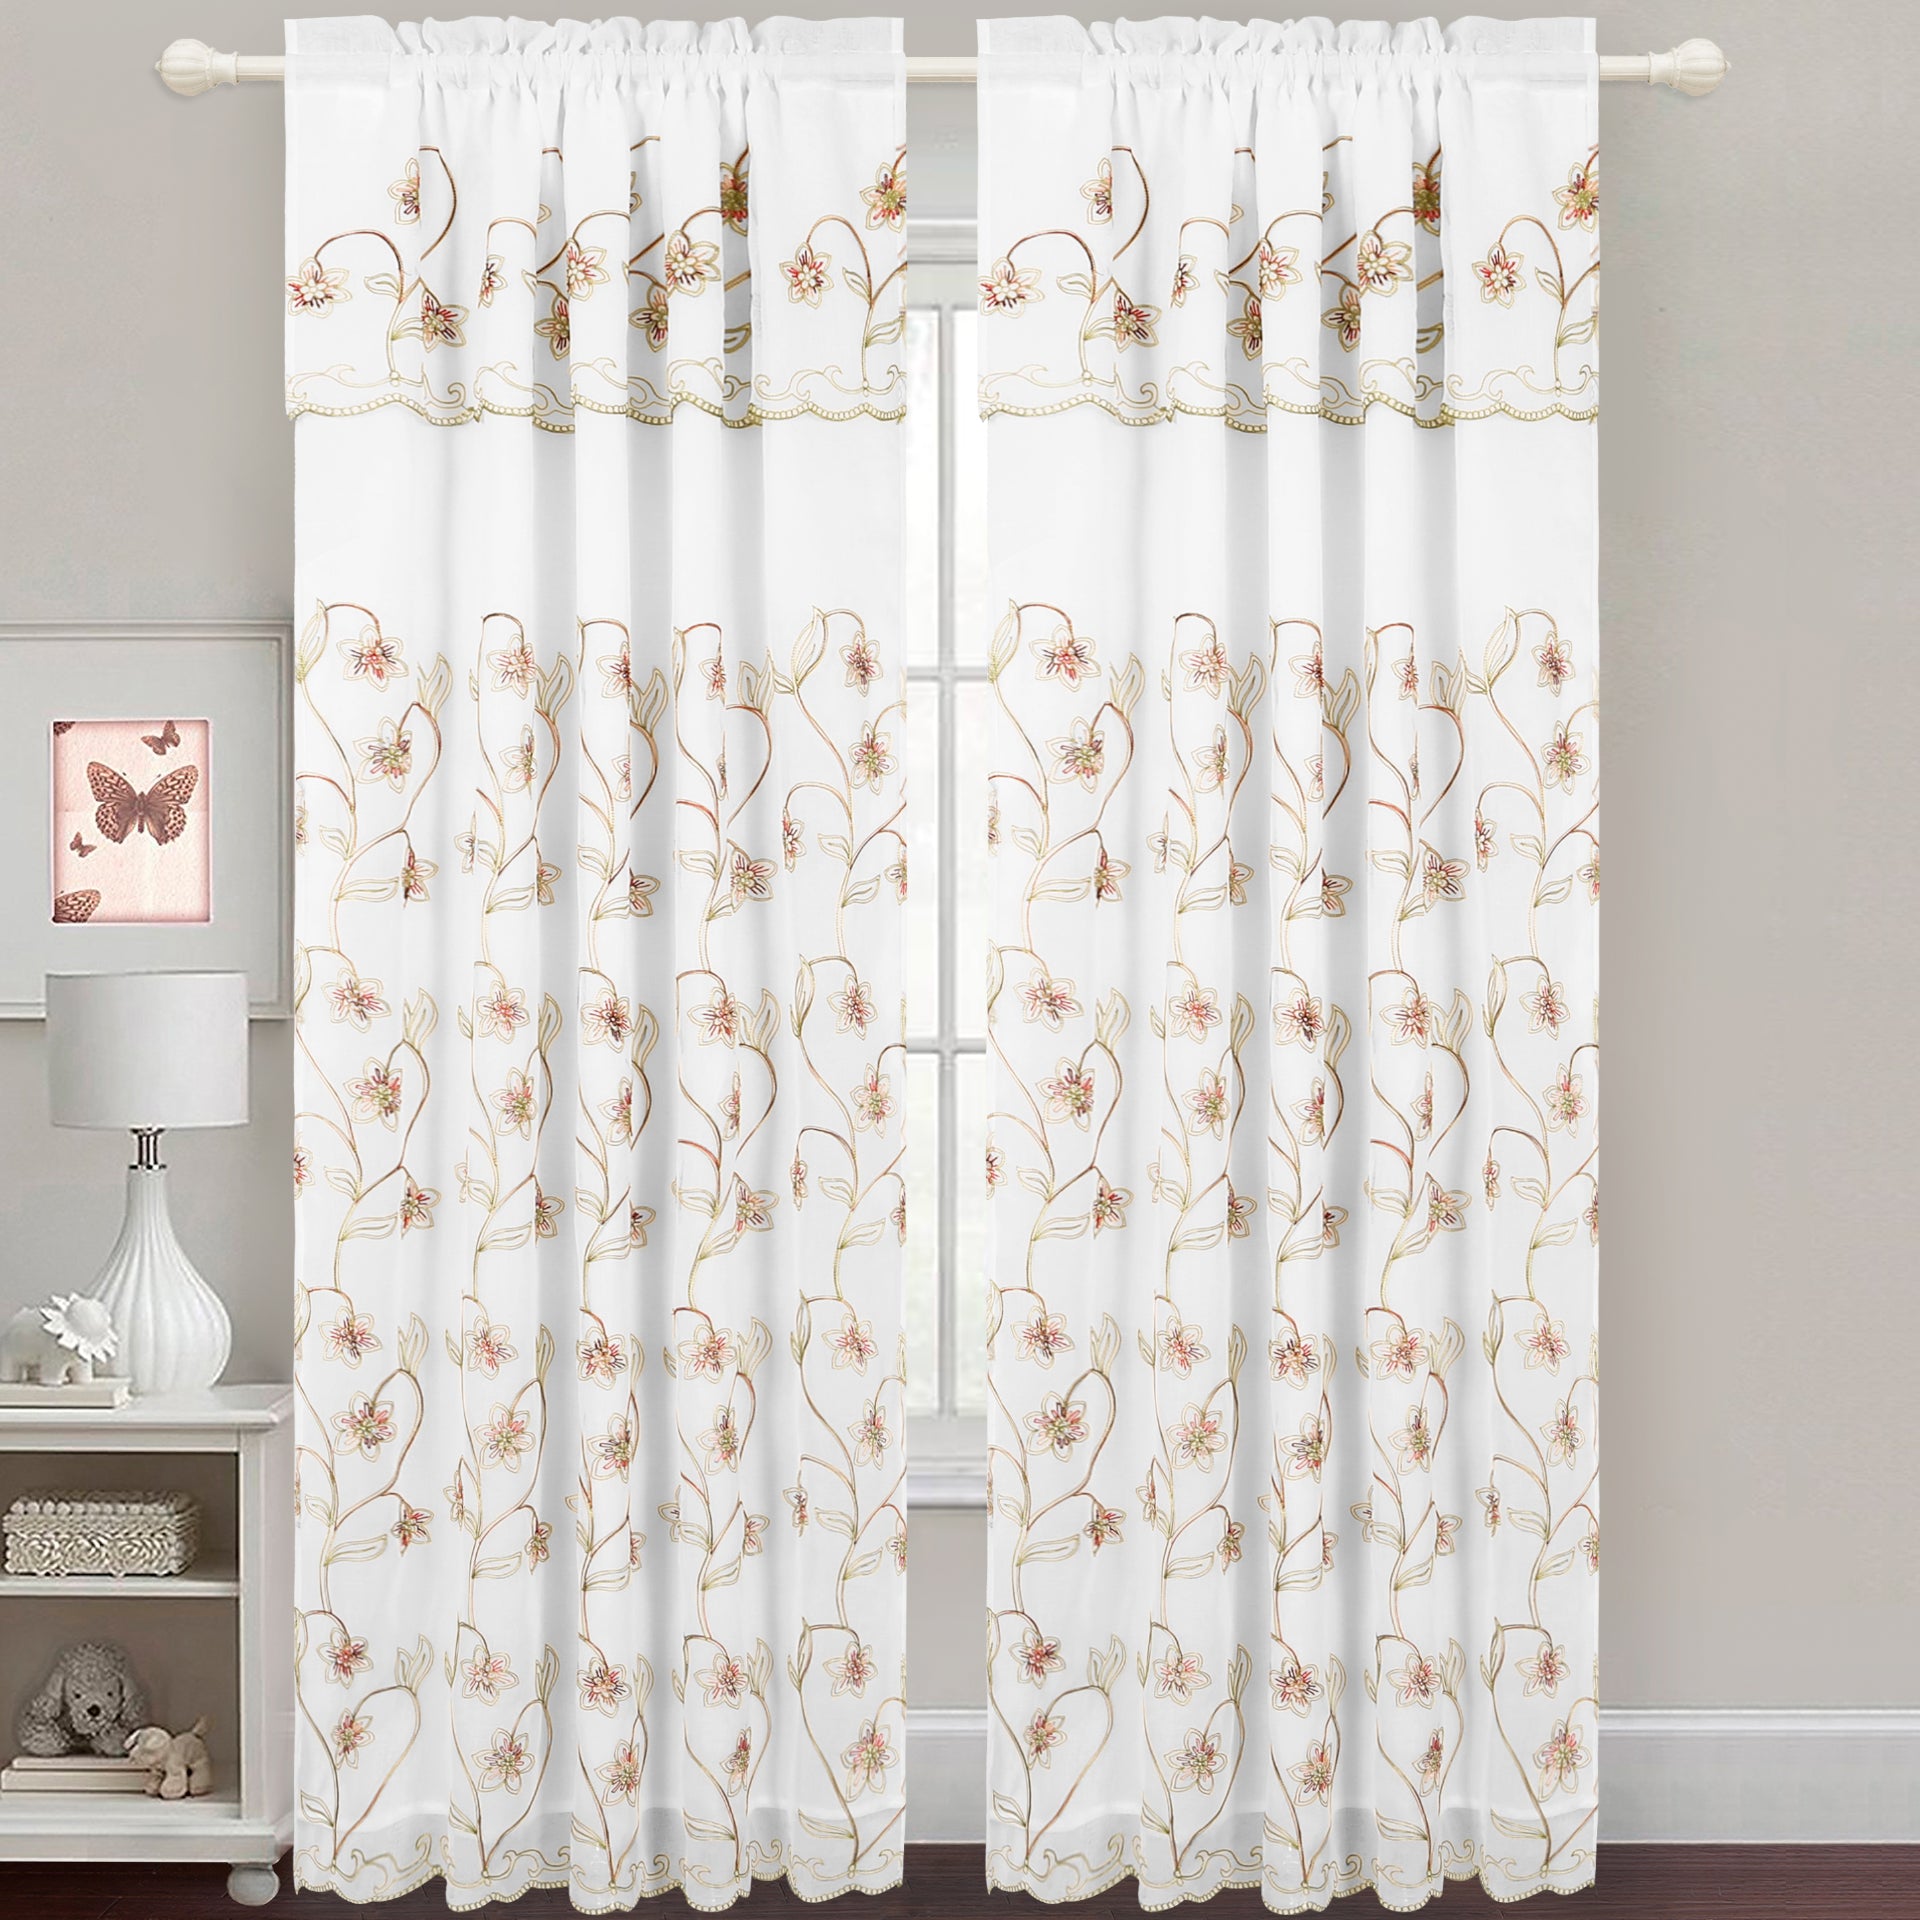 Gabriella - Snow Voile Embroidered Panel - Set of Two - Assorted Colors - Glory Home Design